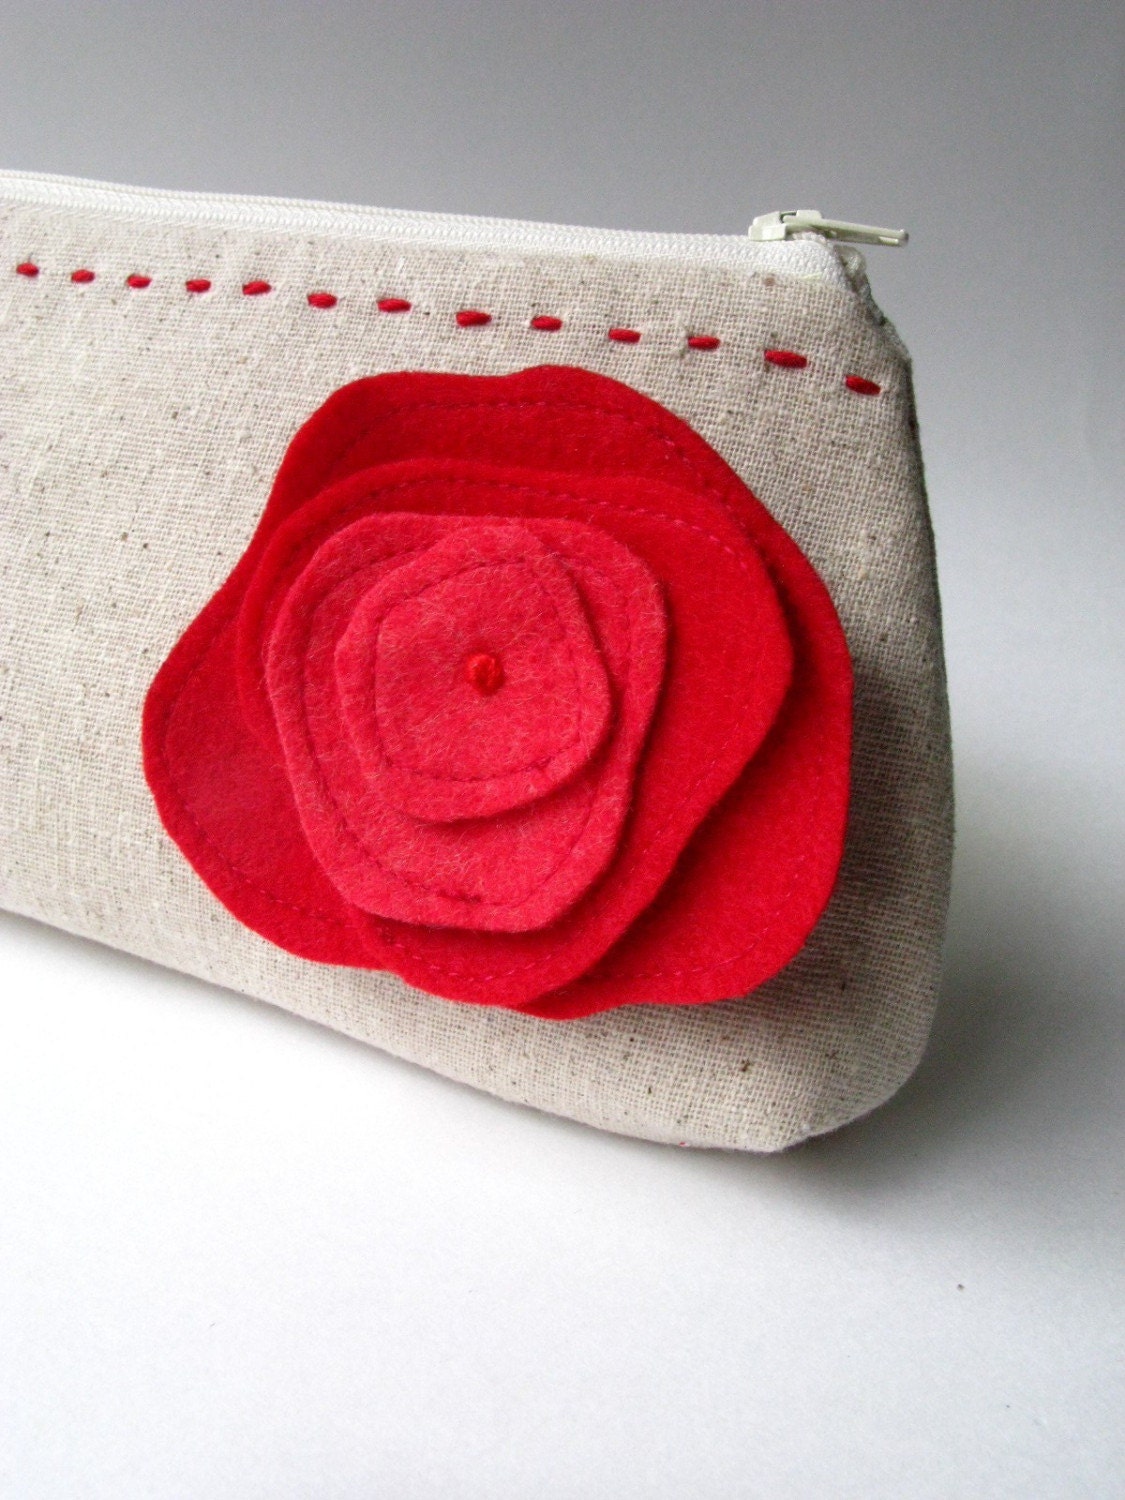 Zipper Clutch - Stitch on Natural Cotton with Red Poppy Brooch